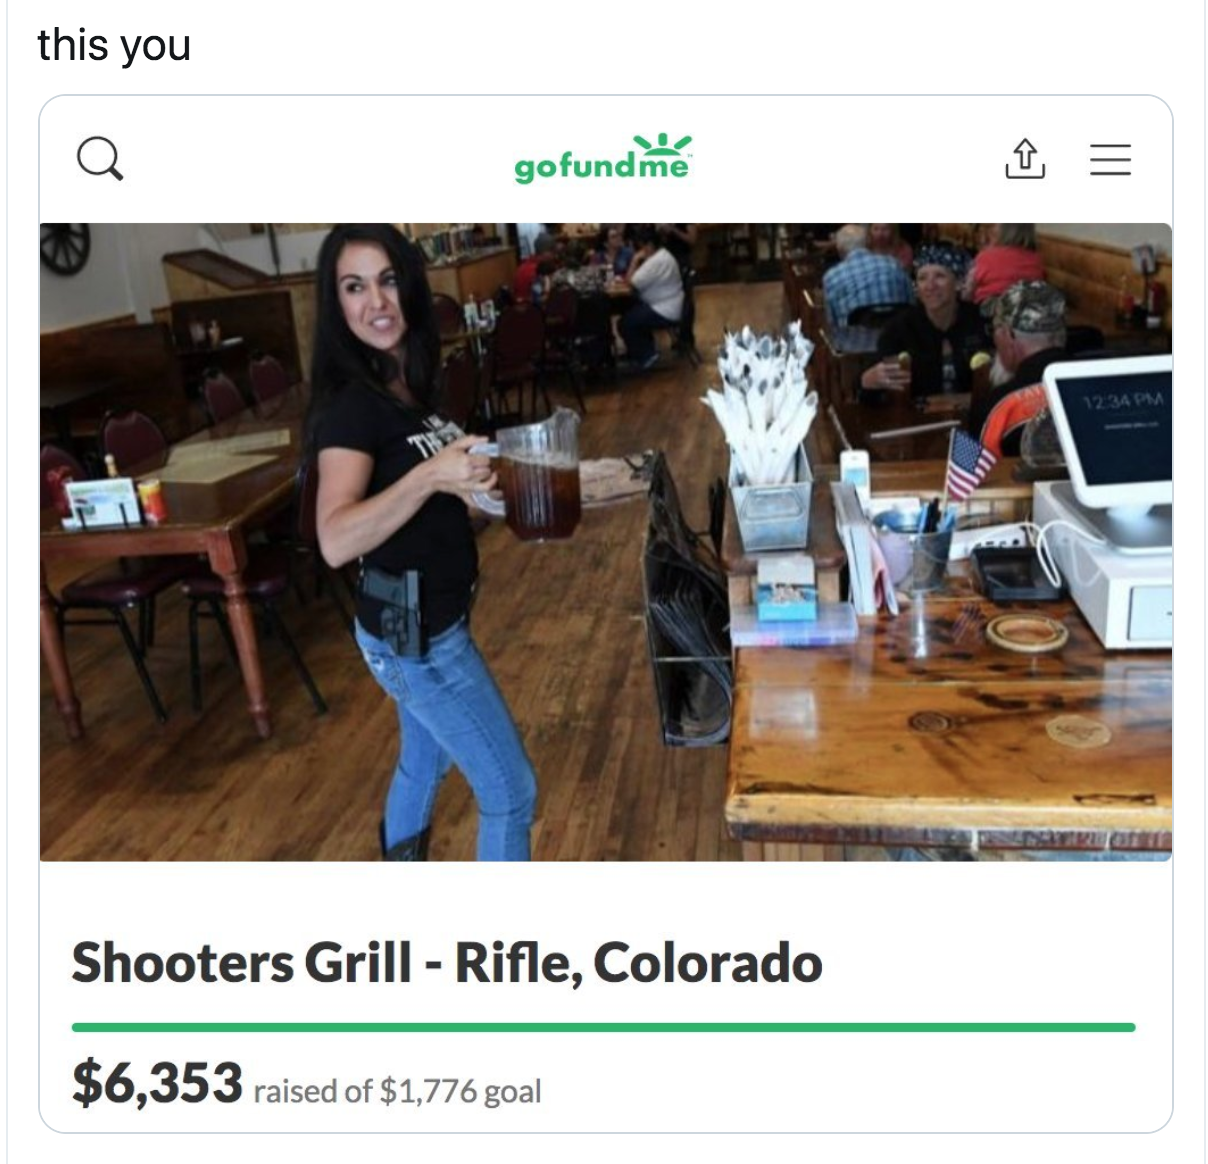 photo caption - this you gofundme Shooters Grill Rifle, Colorado $6,353 raised of $1,776 goal